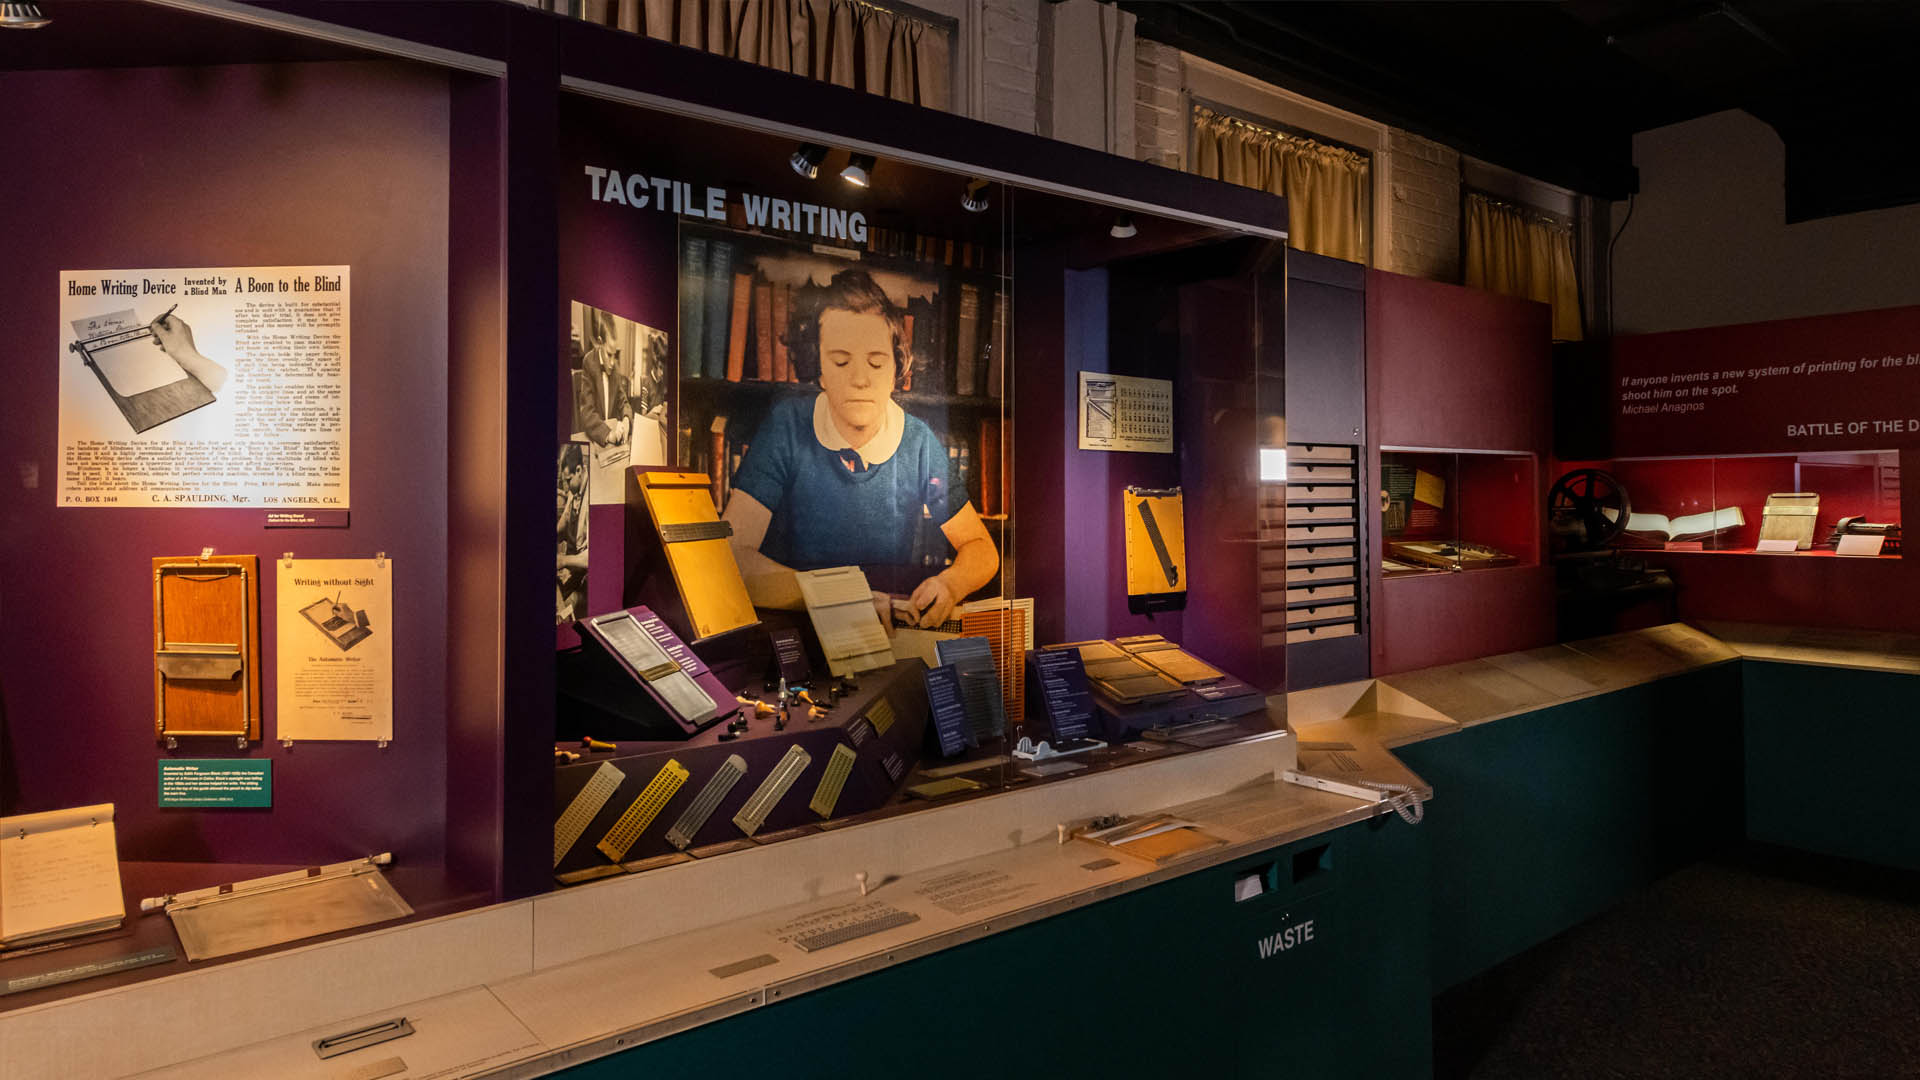 A museum exhibit featuring a case full of braille slates, a picture of a girl writing braille, and a reading rail with tools mounted to it